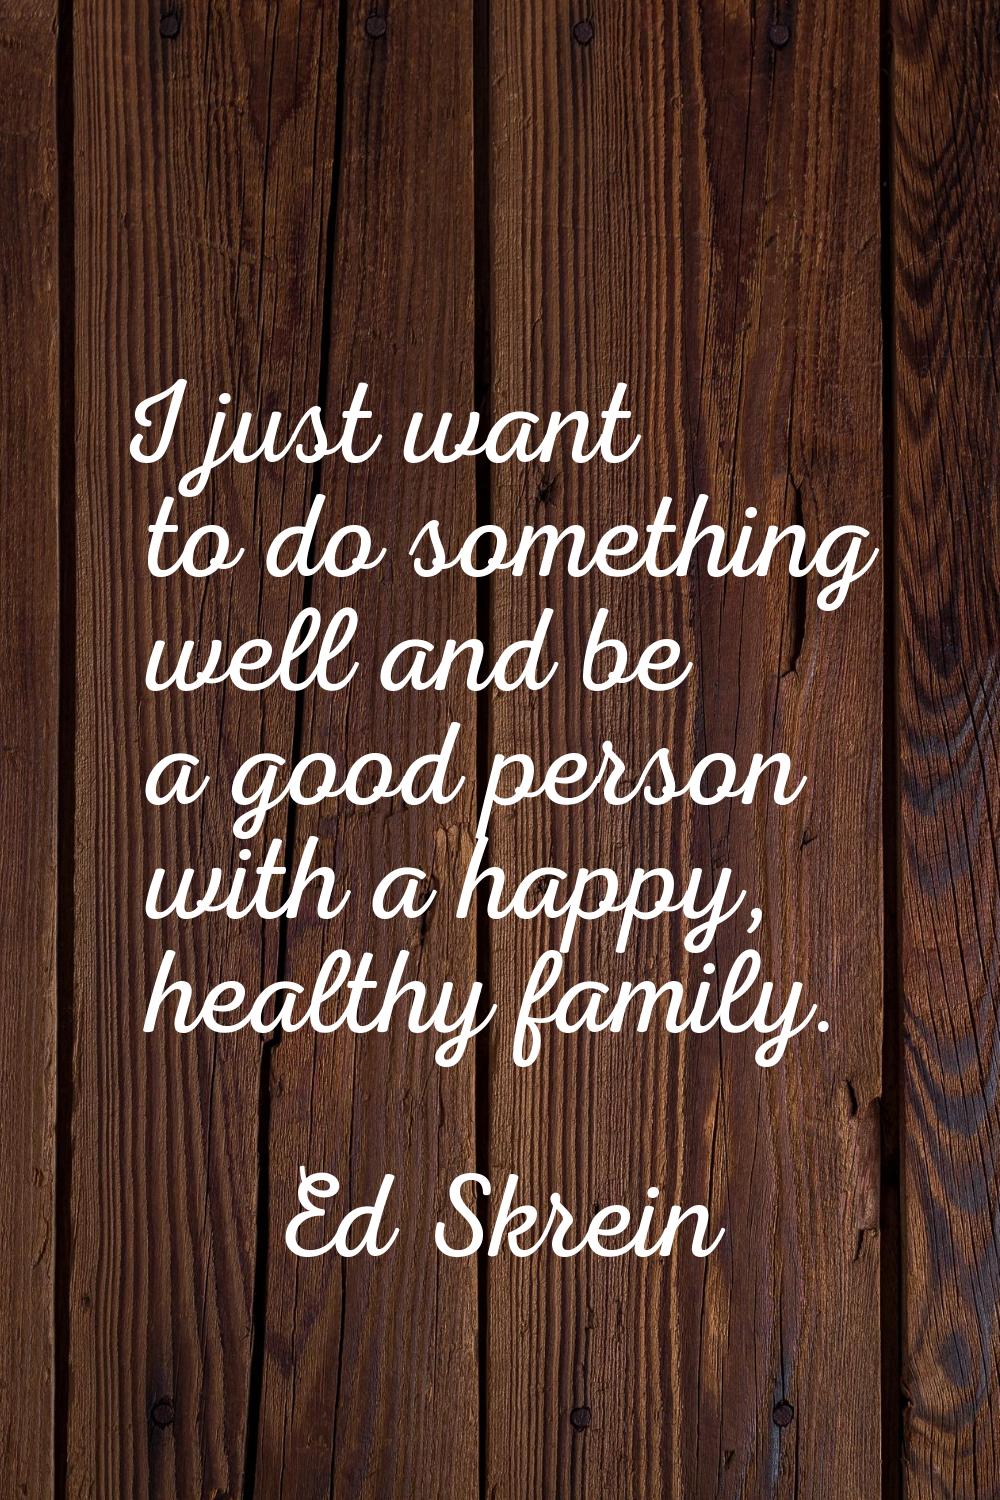 I just want to do something well and be a good person with a happy, healthy family.